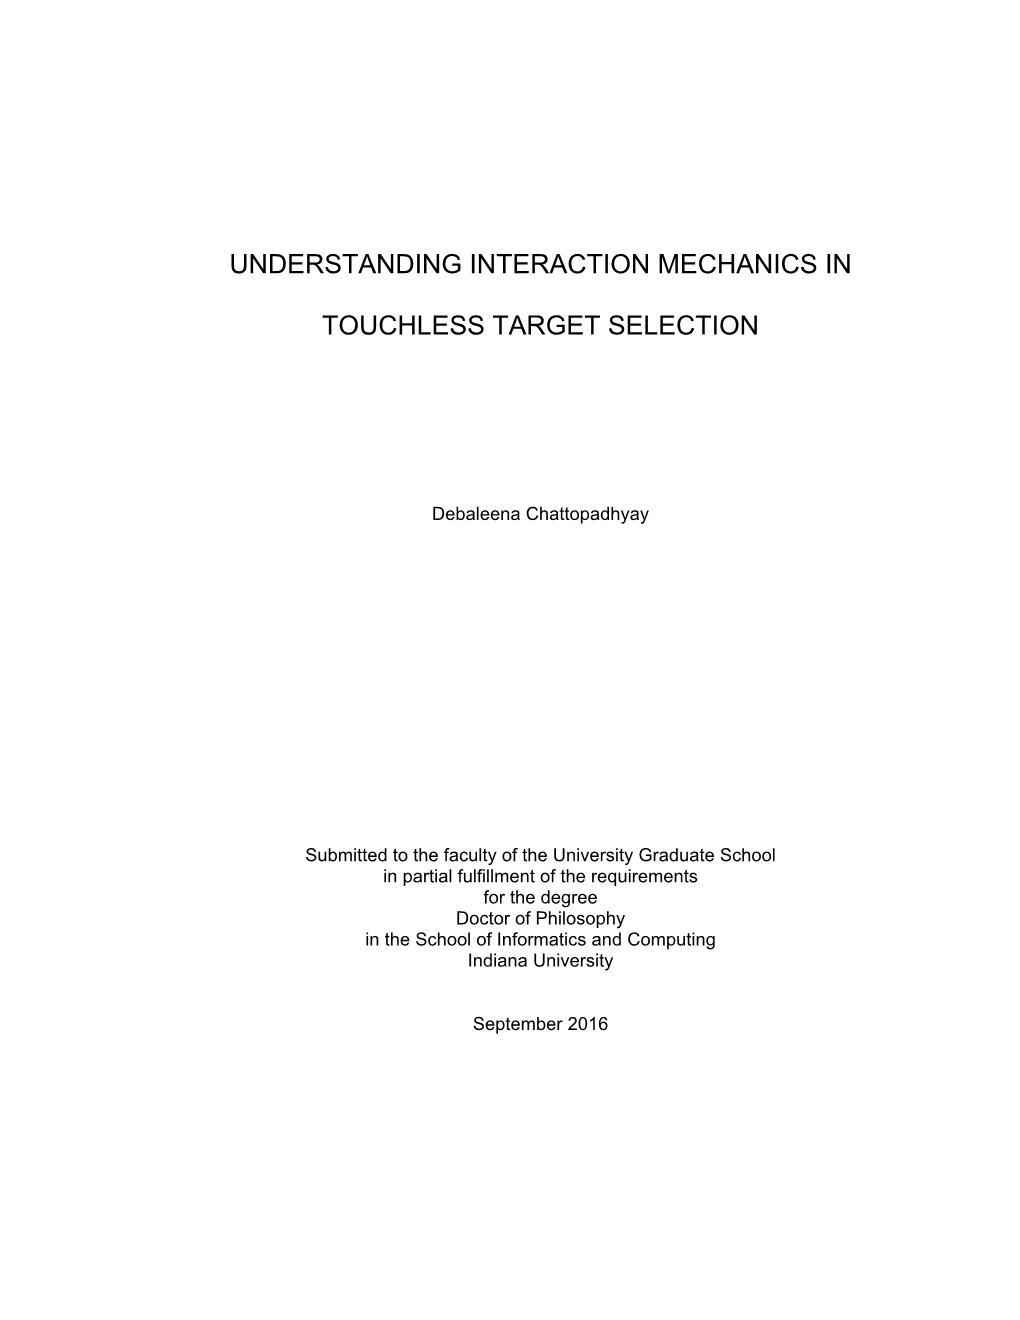 UNDERSTANDING INTERACTION MECHANICS in TOUCHLESS TARGET SELECTION We Use Gestures Frequently in Daily Life—To Interact with People, Pets, Or Objects